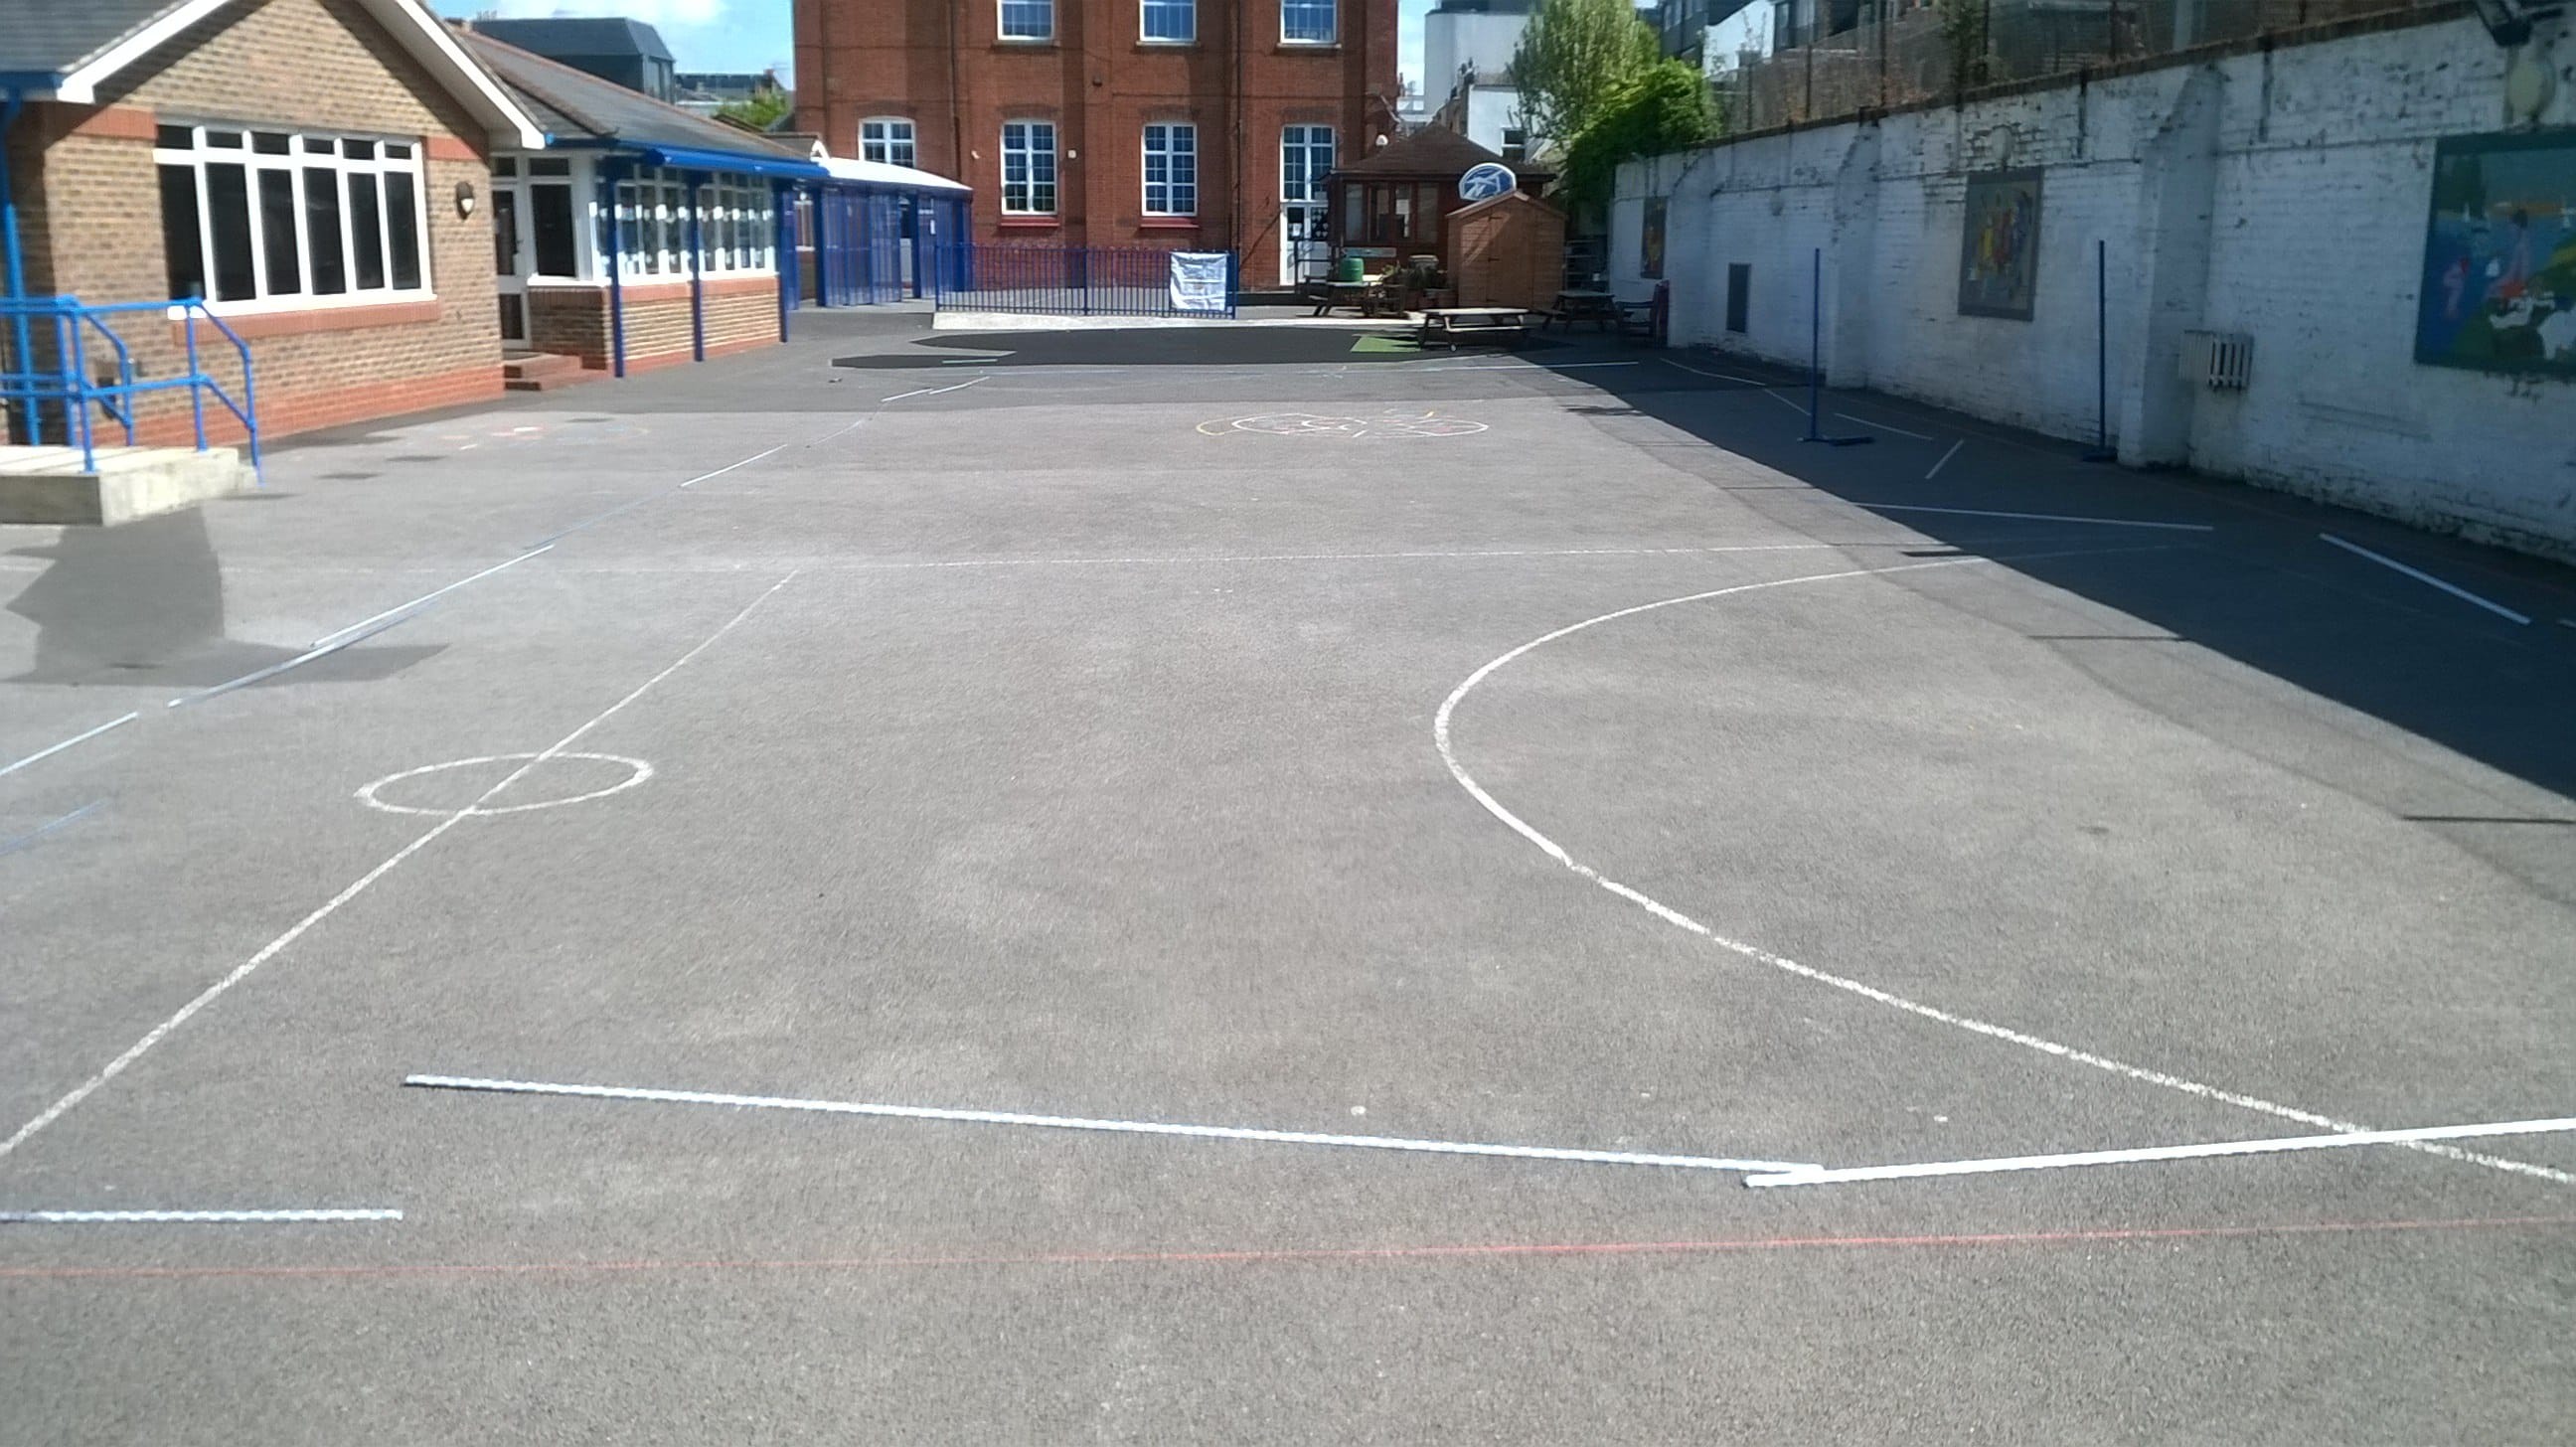 Tarmac Playground before installation of artificial grass playground surface by stm